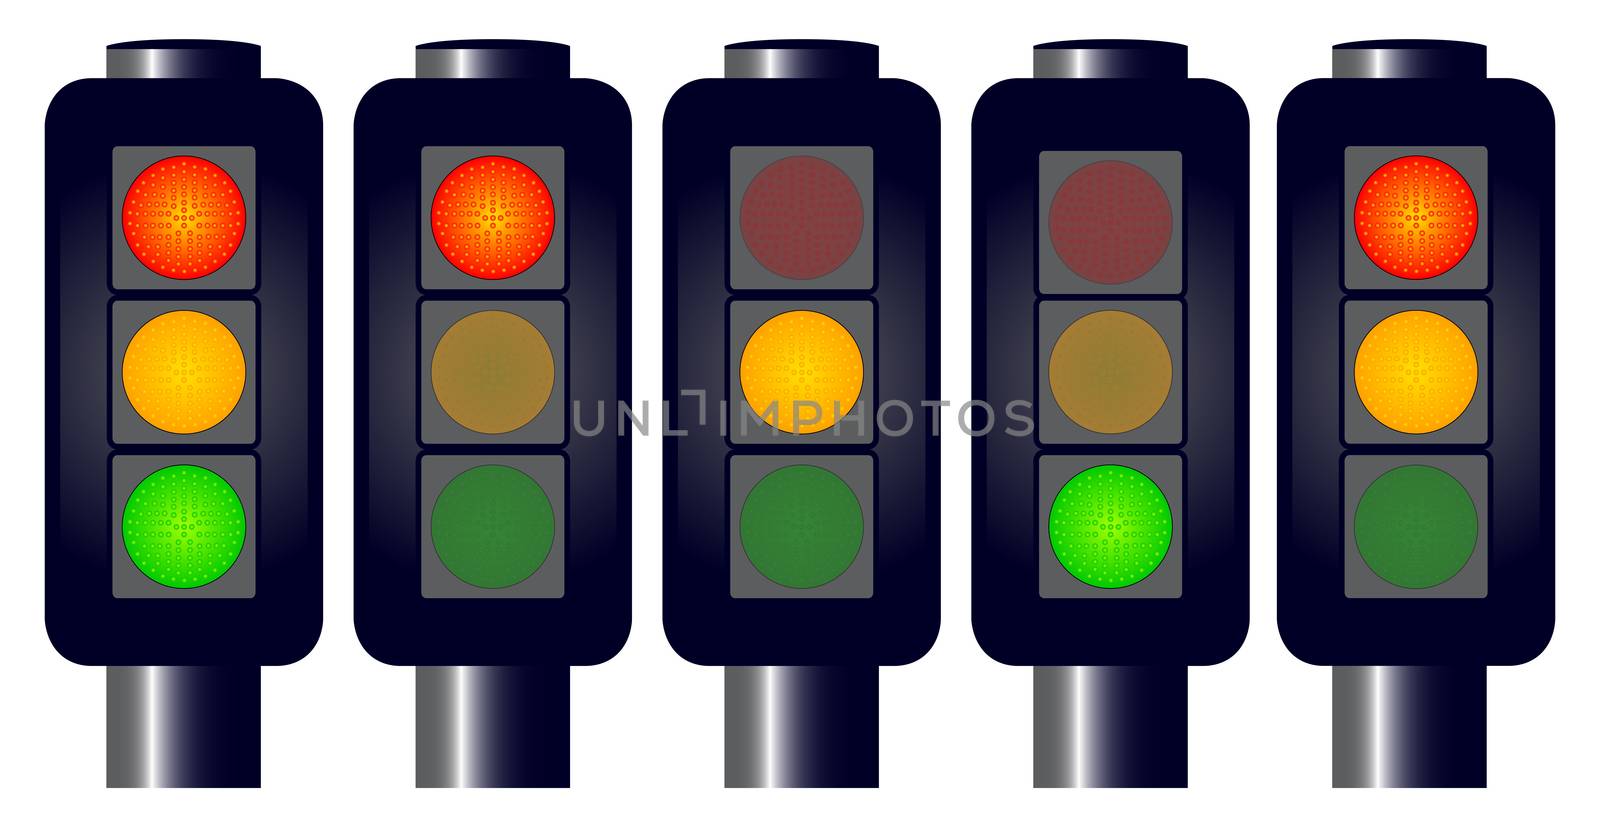 A set of traffic lights including one with all lights on. No meshes.